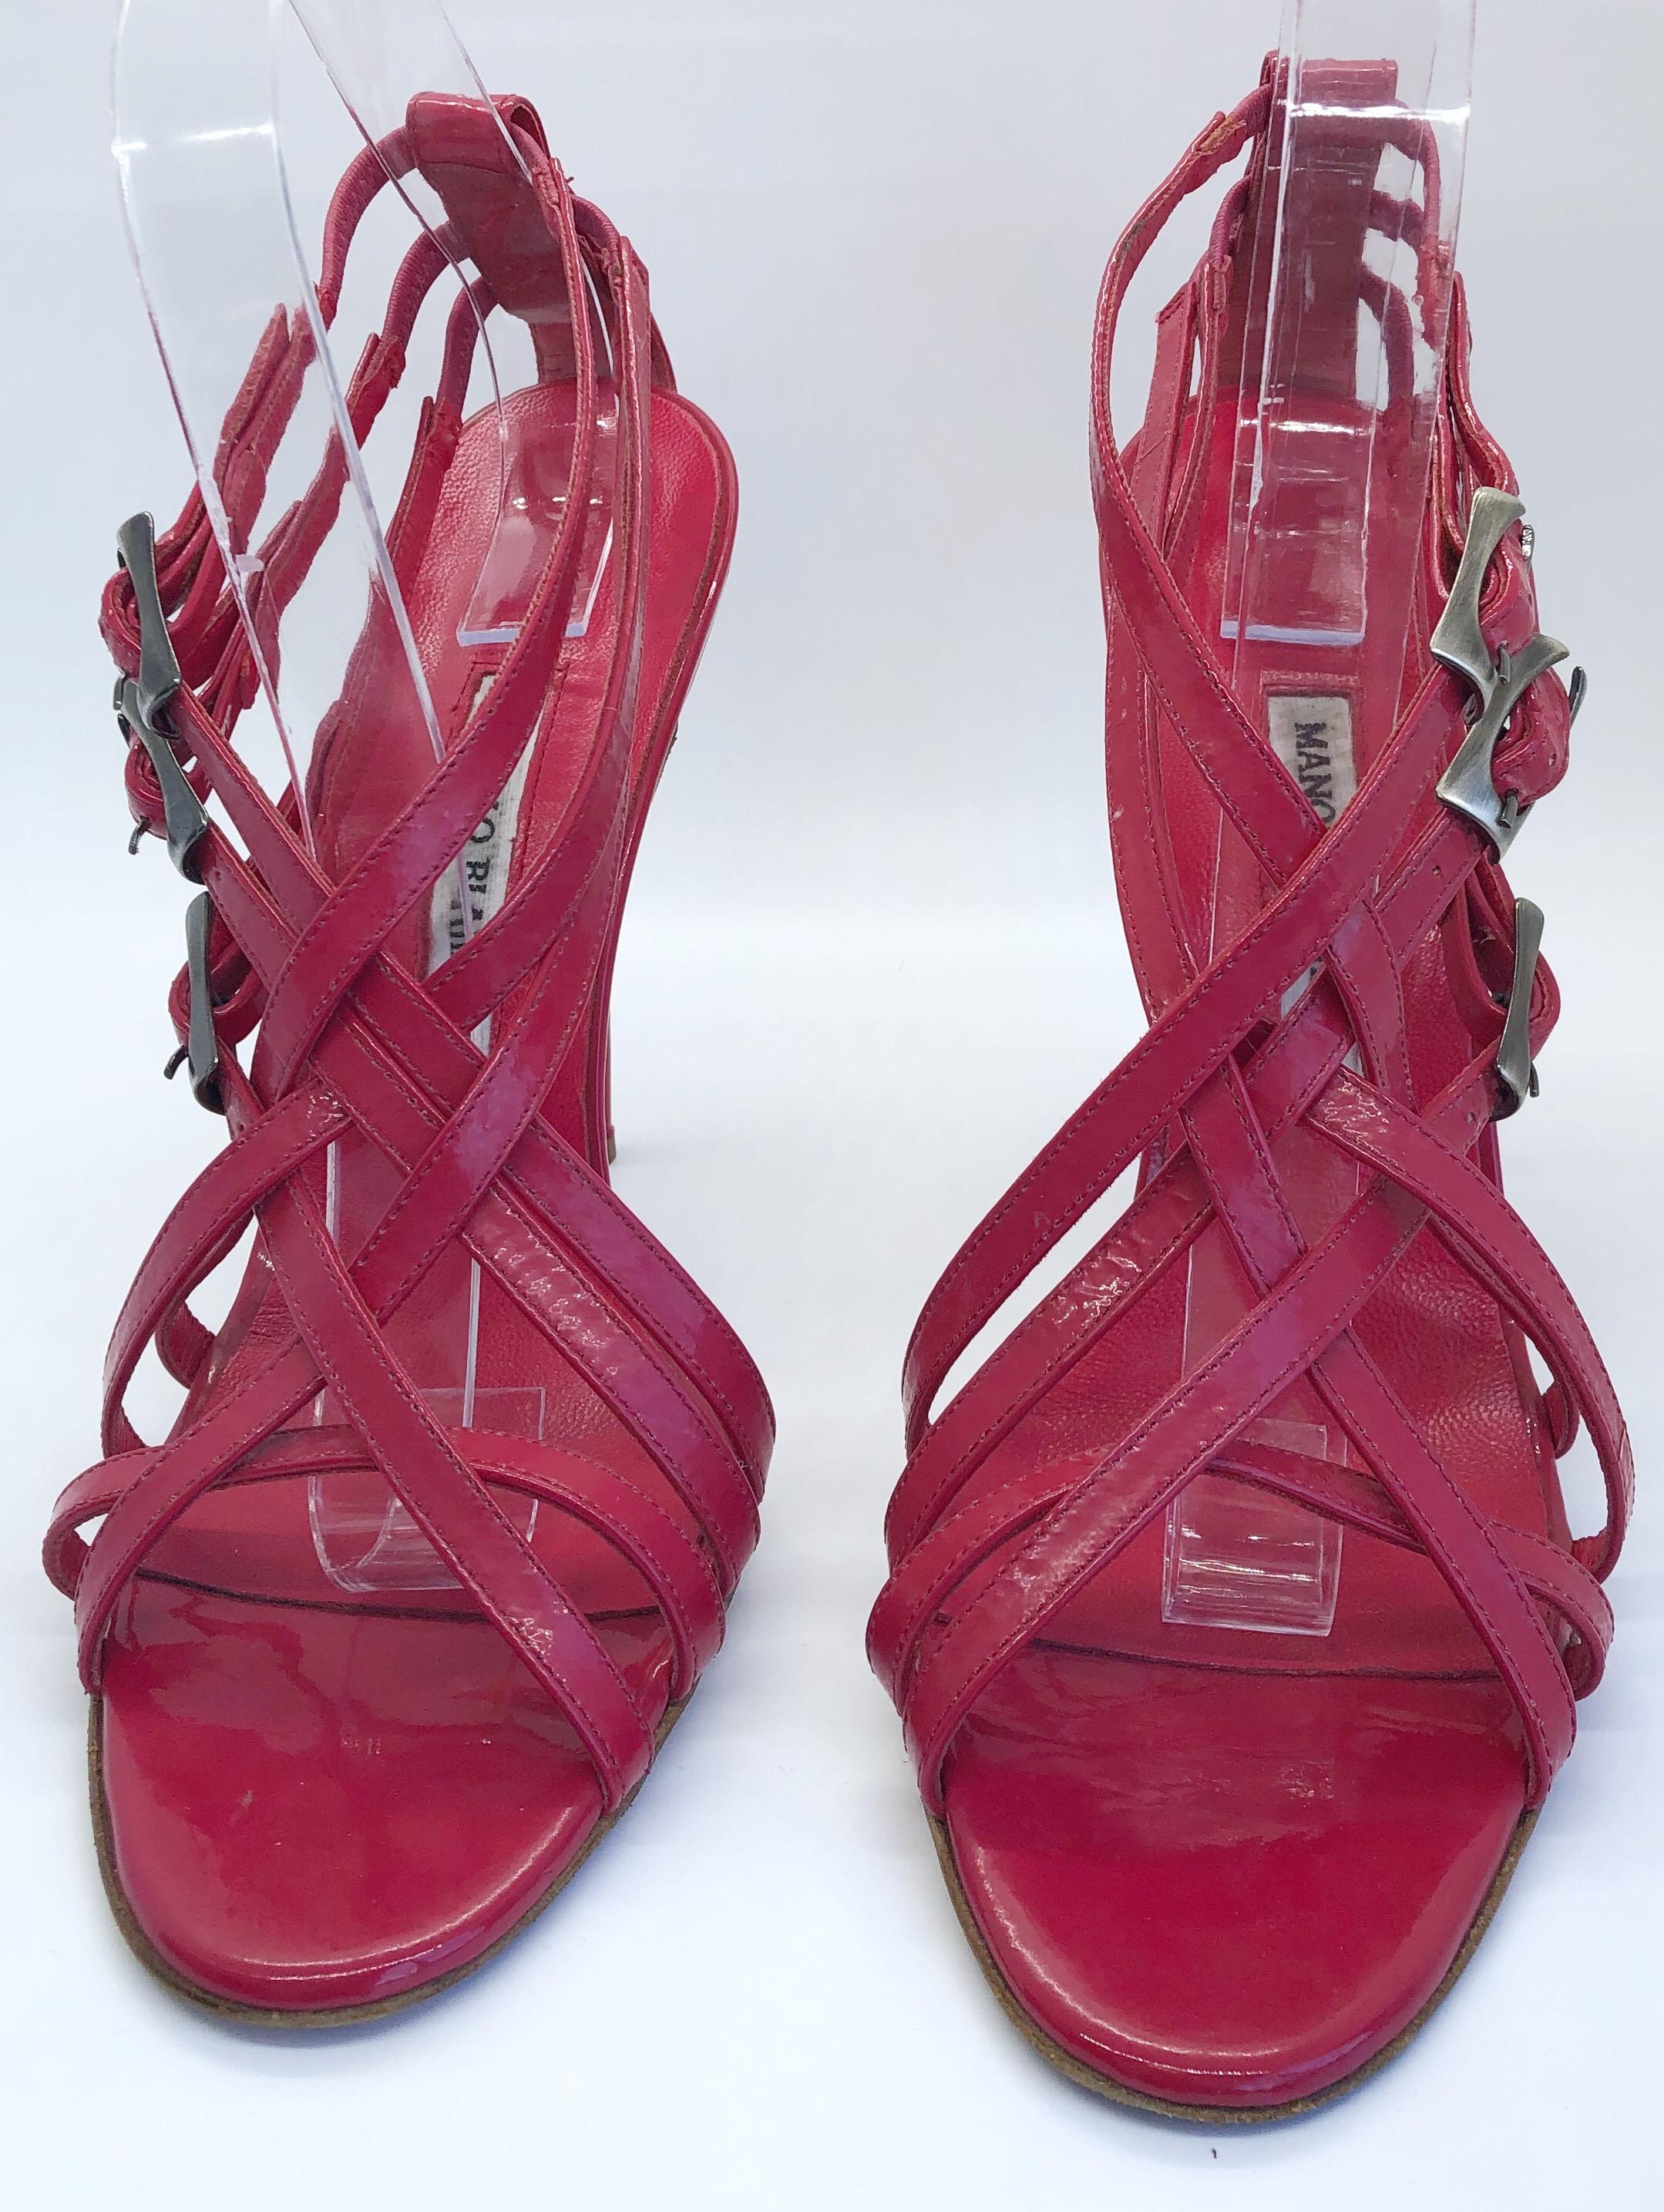 Women's Manolo Blahnik Size 41 / 11 Raspberry Pink Patent Leather Strappy High Heels  For Sale